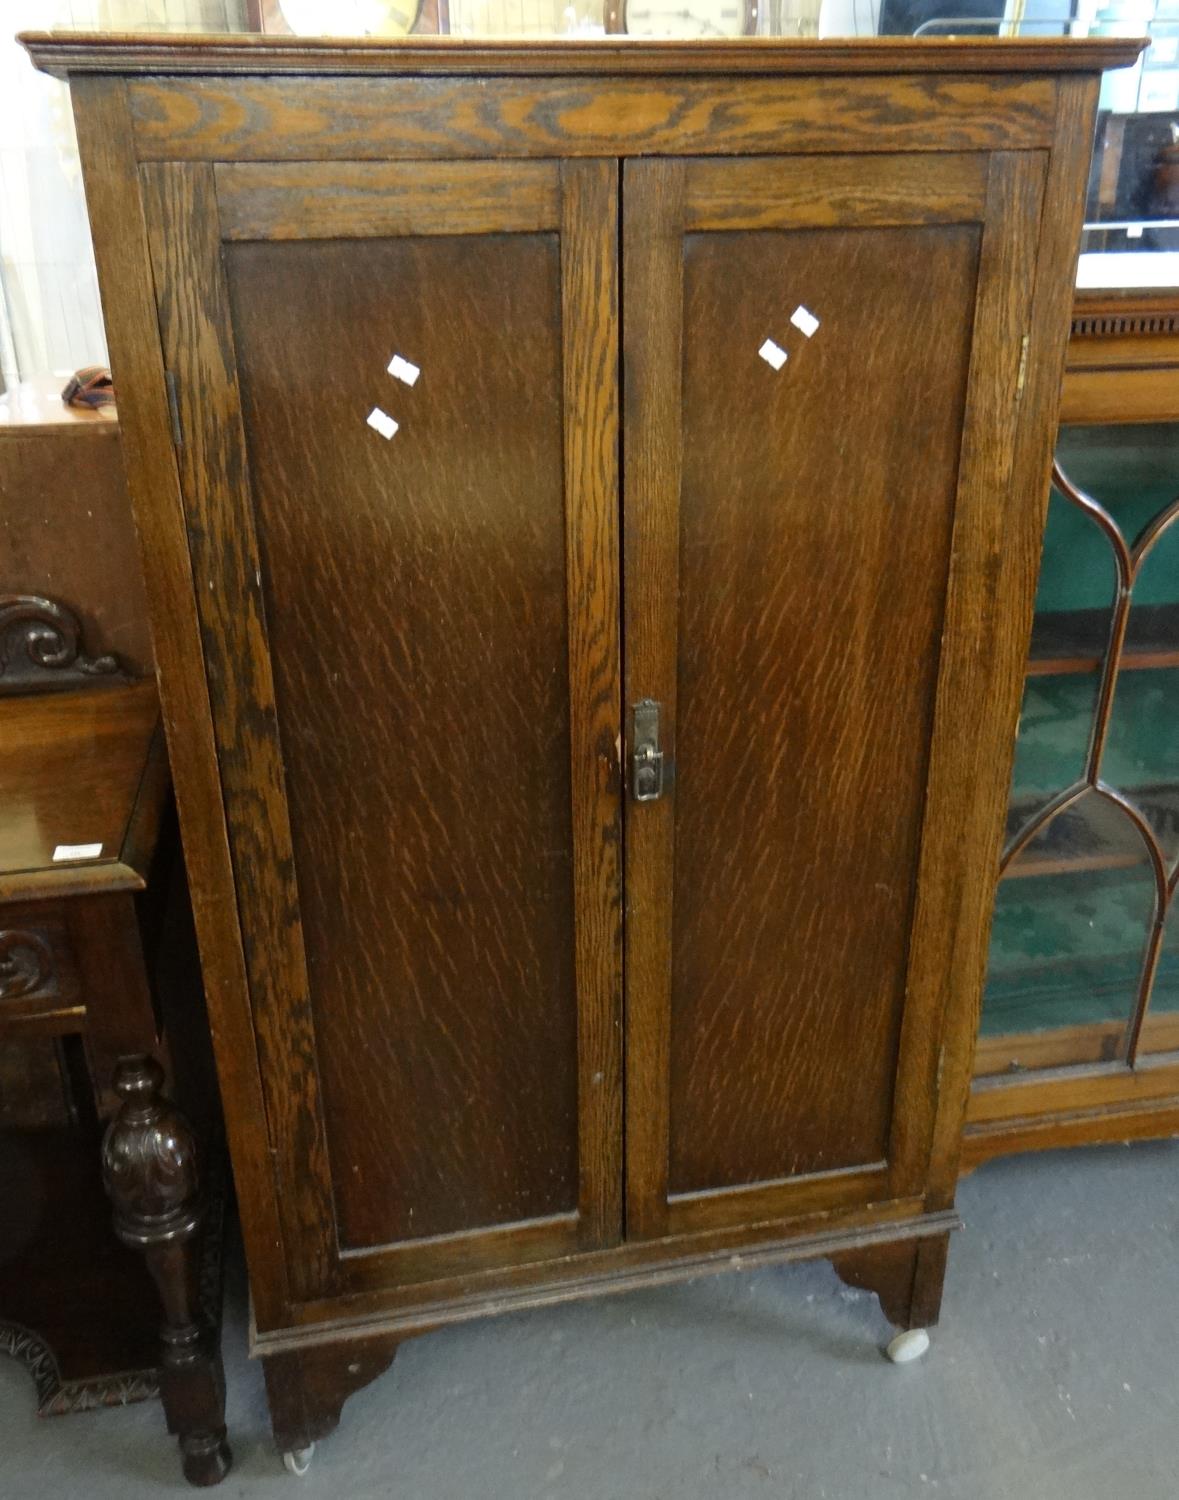 Early 20th century oak two door blind panelled cabinet on wheels, the interior revealing three